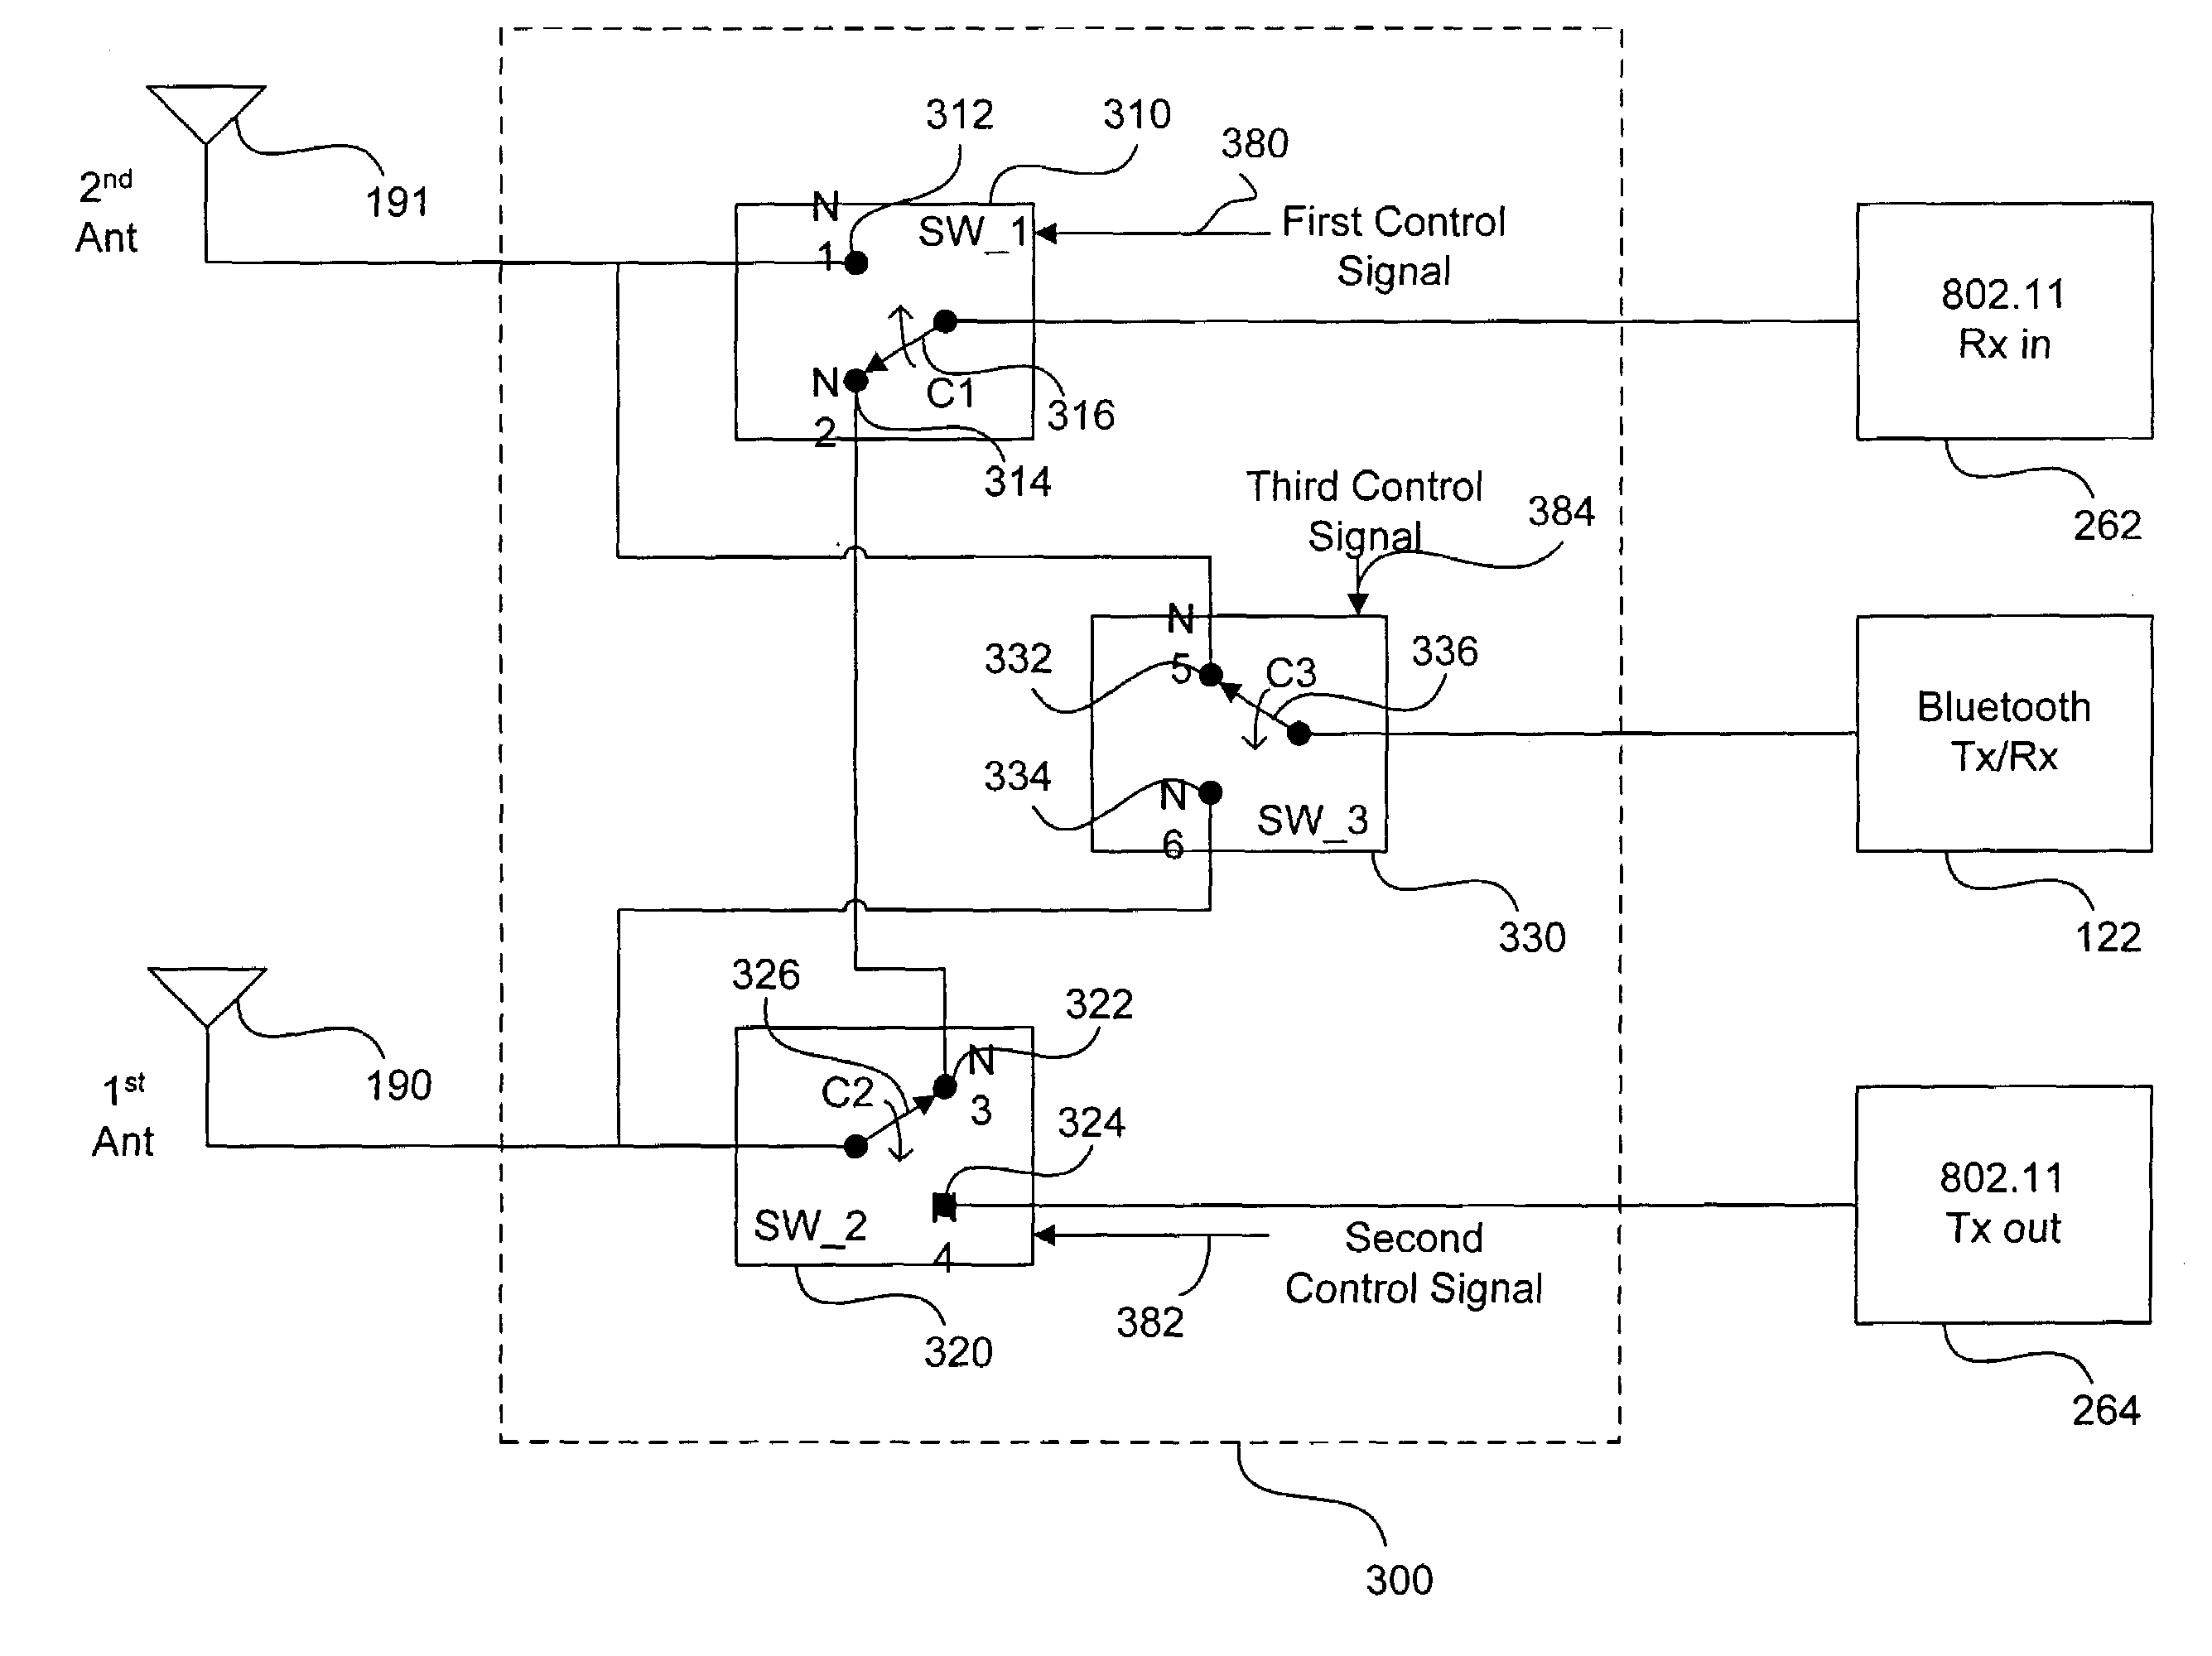 Method and apparatus for operating a dual-mode radio in a wireless communication system